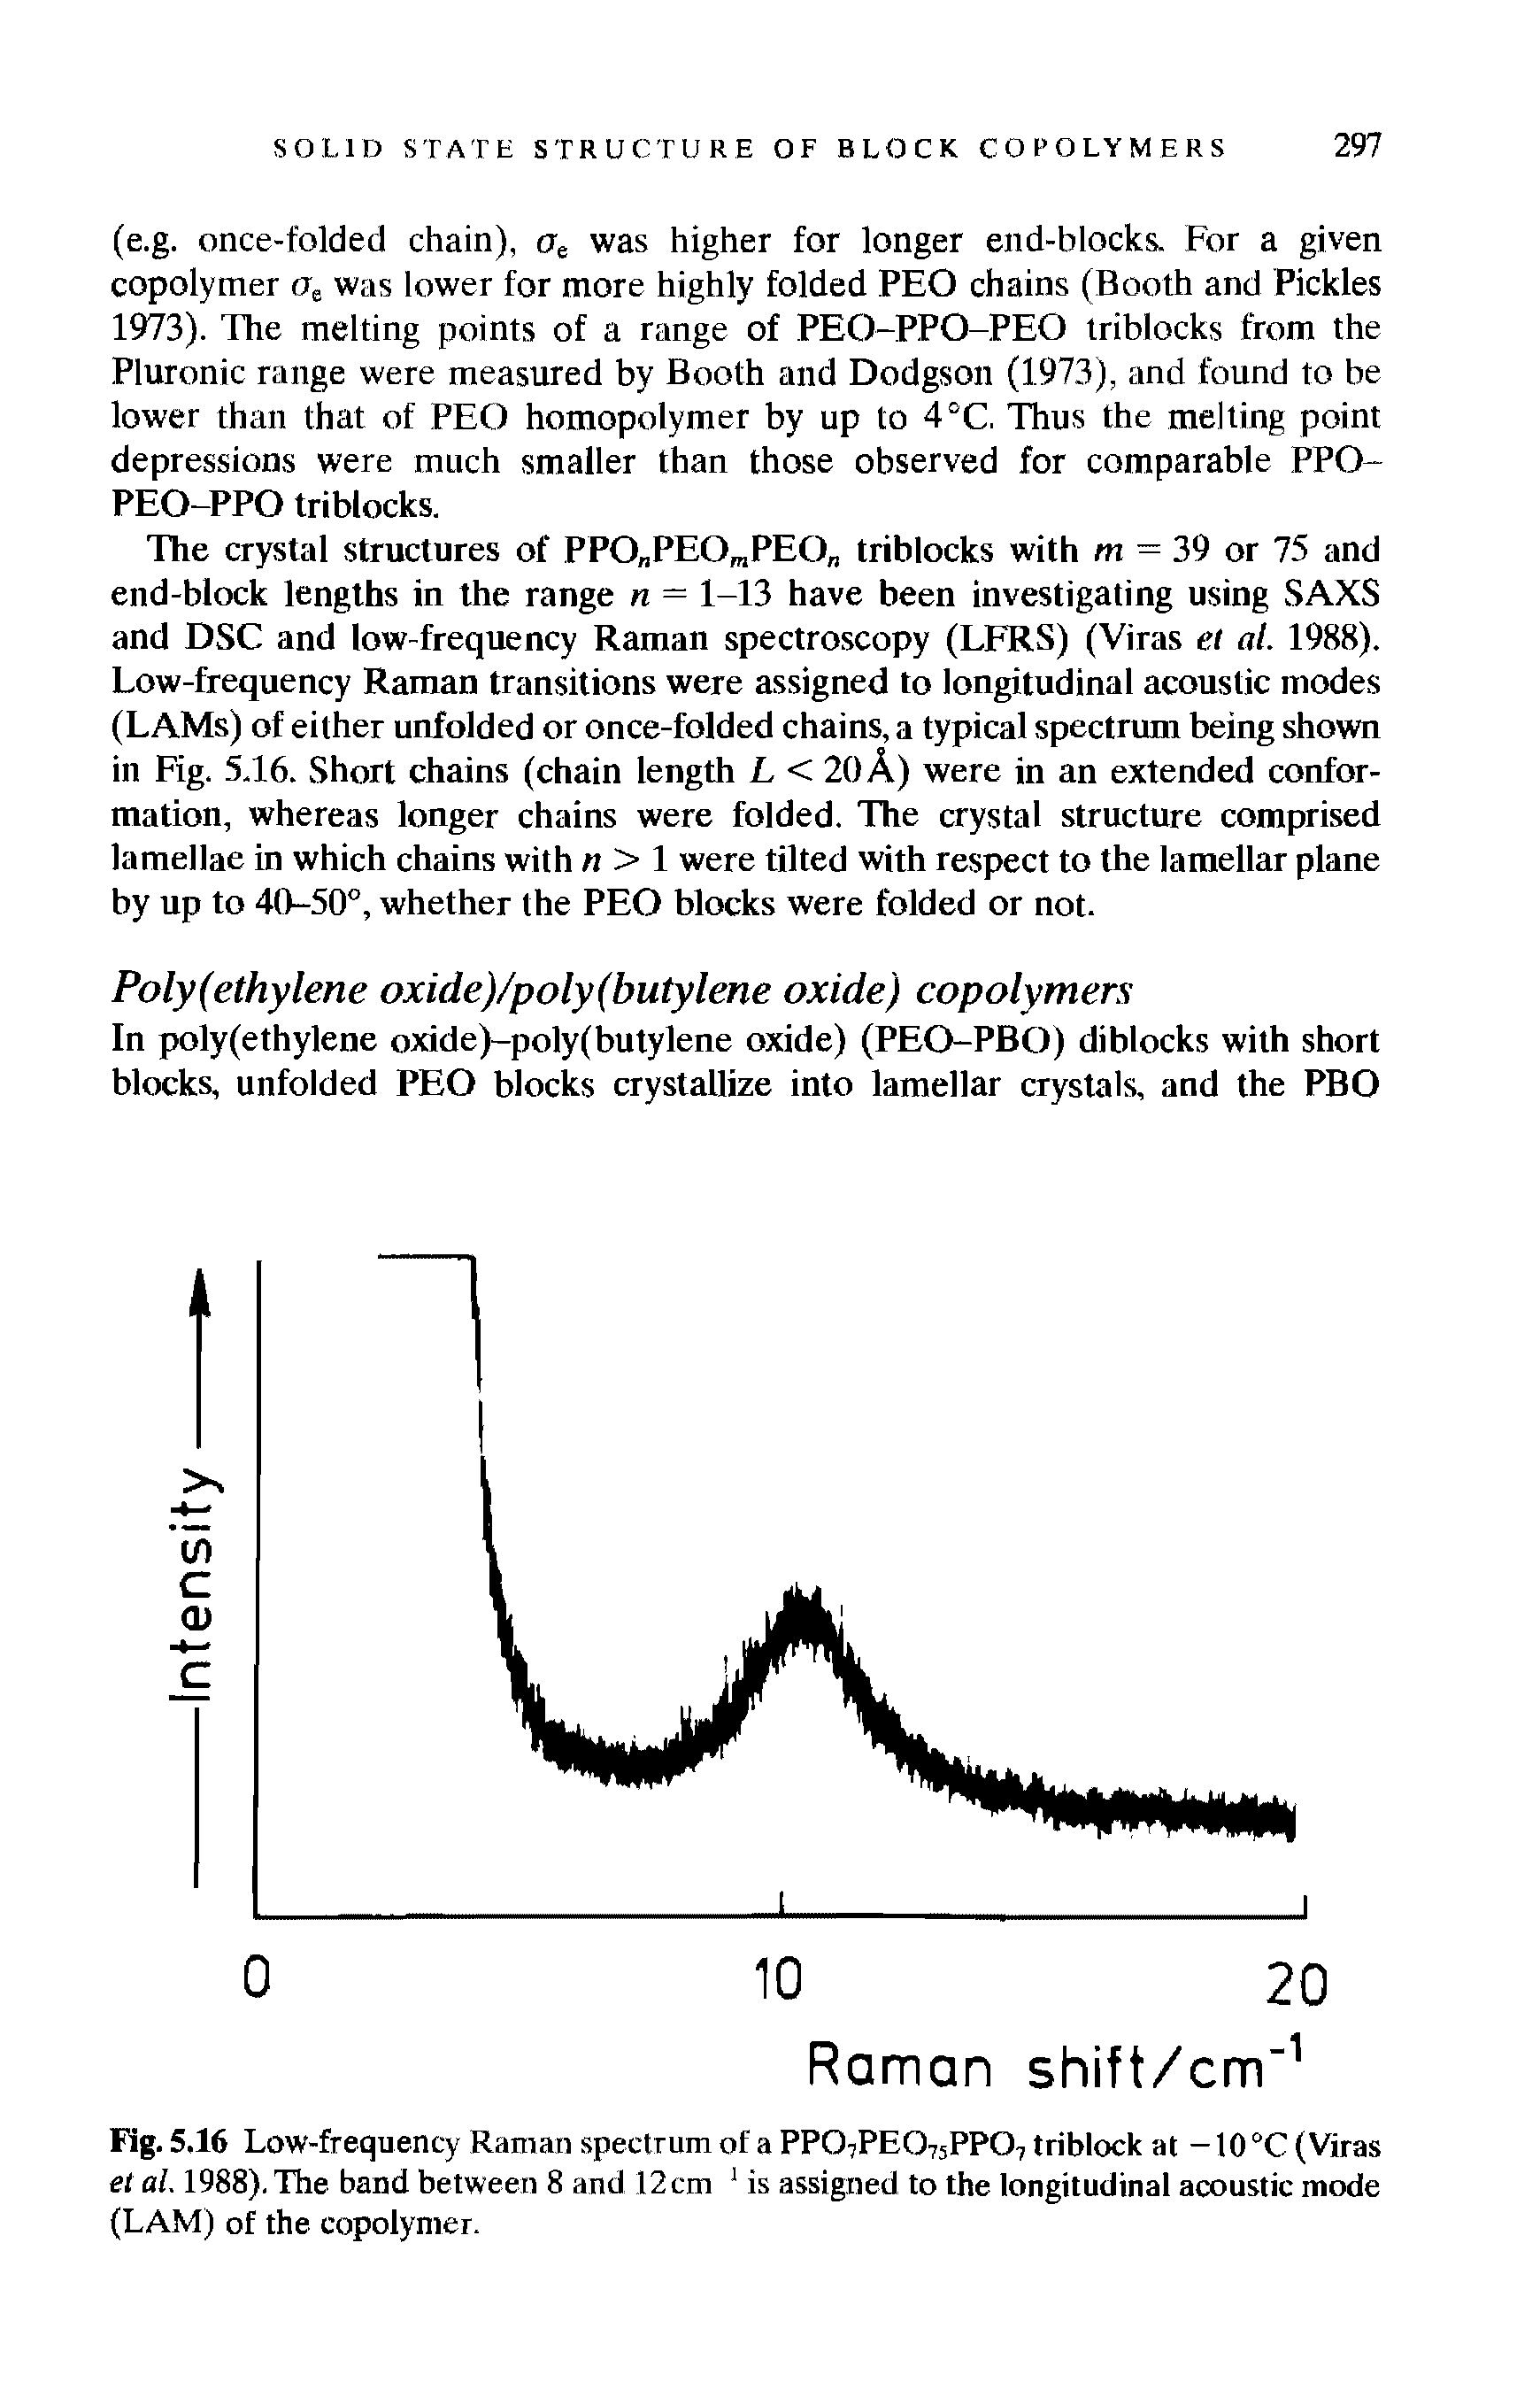 Fig. 5.16 Low-frequency Raman spectrum of a PP07PE075PP07 triblock at -10 °C (Viras et al. 1988). The band between 8 and 12 cm 1 is assigned to the longitudinal acoustic mode (LAM) of the copolymer.